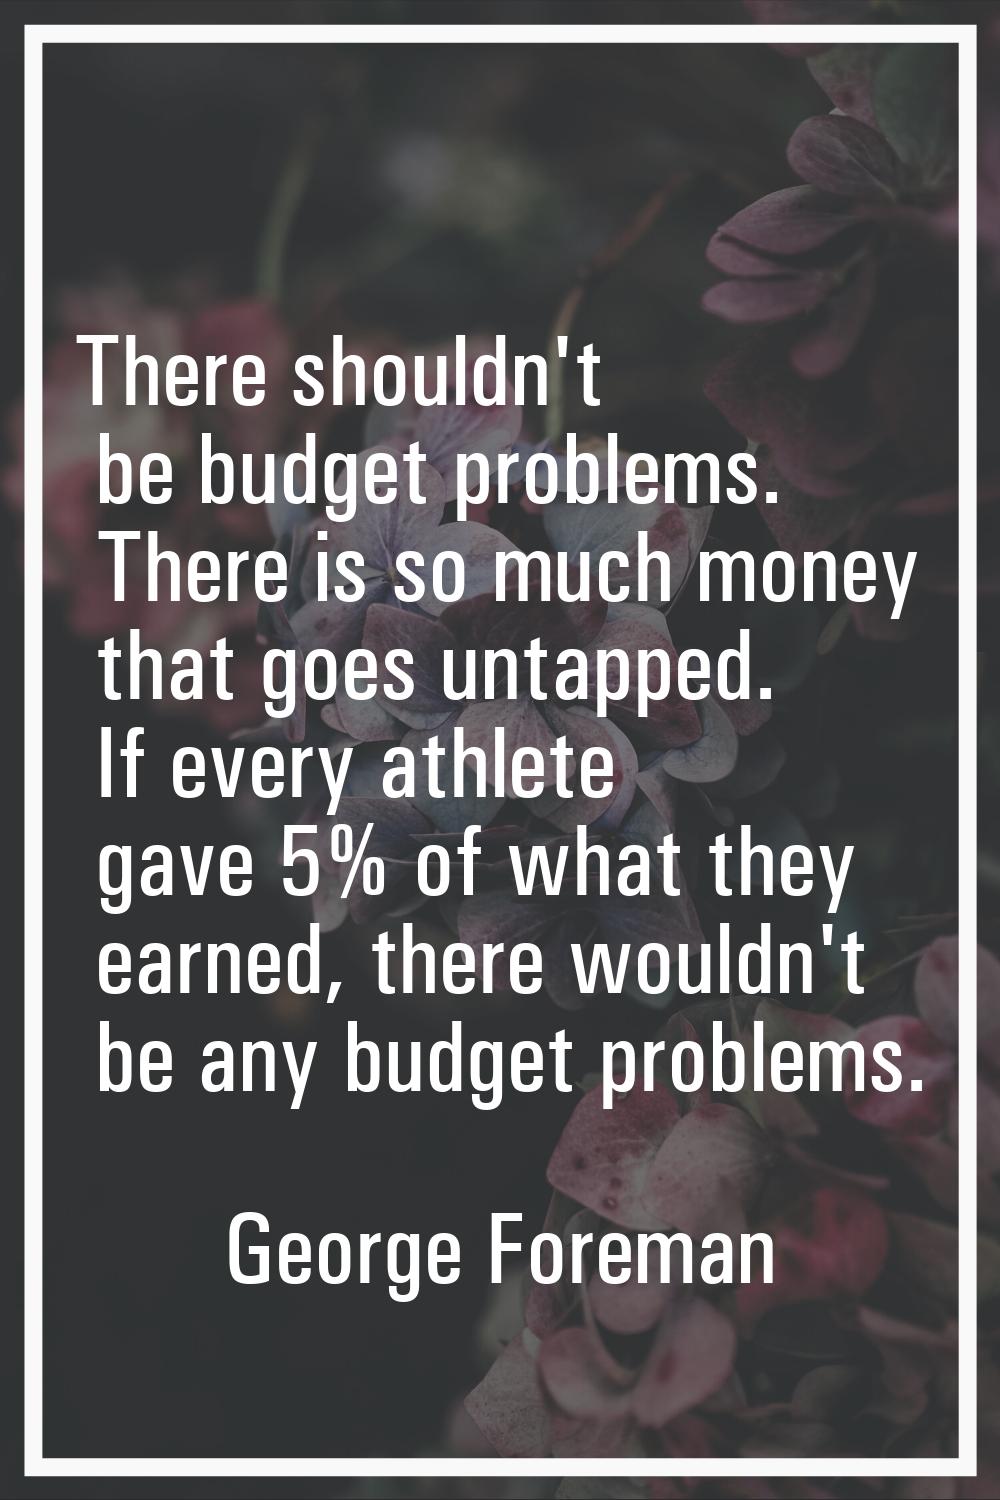 There shouldn't be budget problems. There is so much money that goes untapped. If every athlete gav